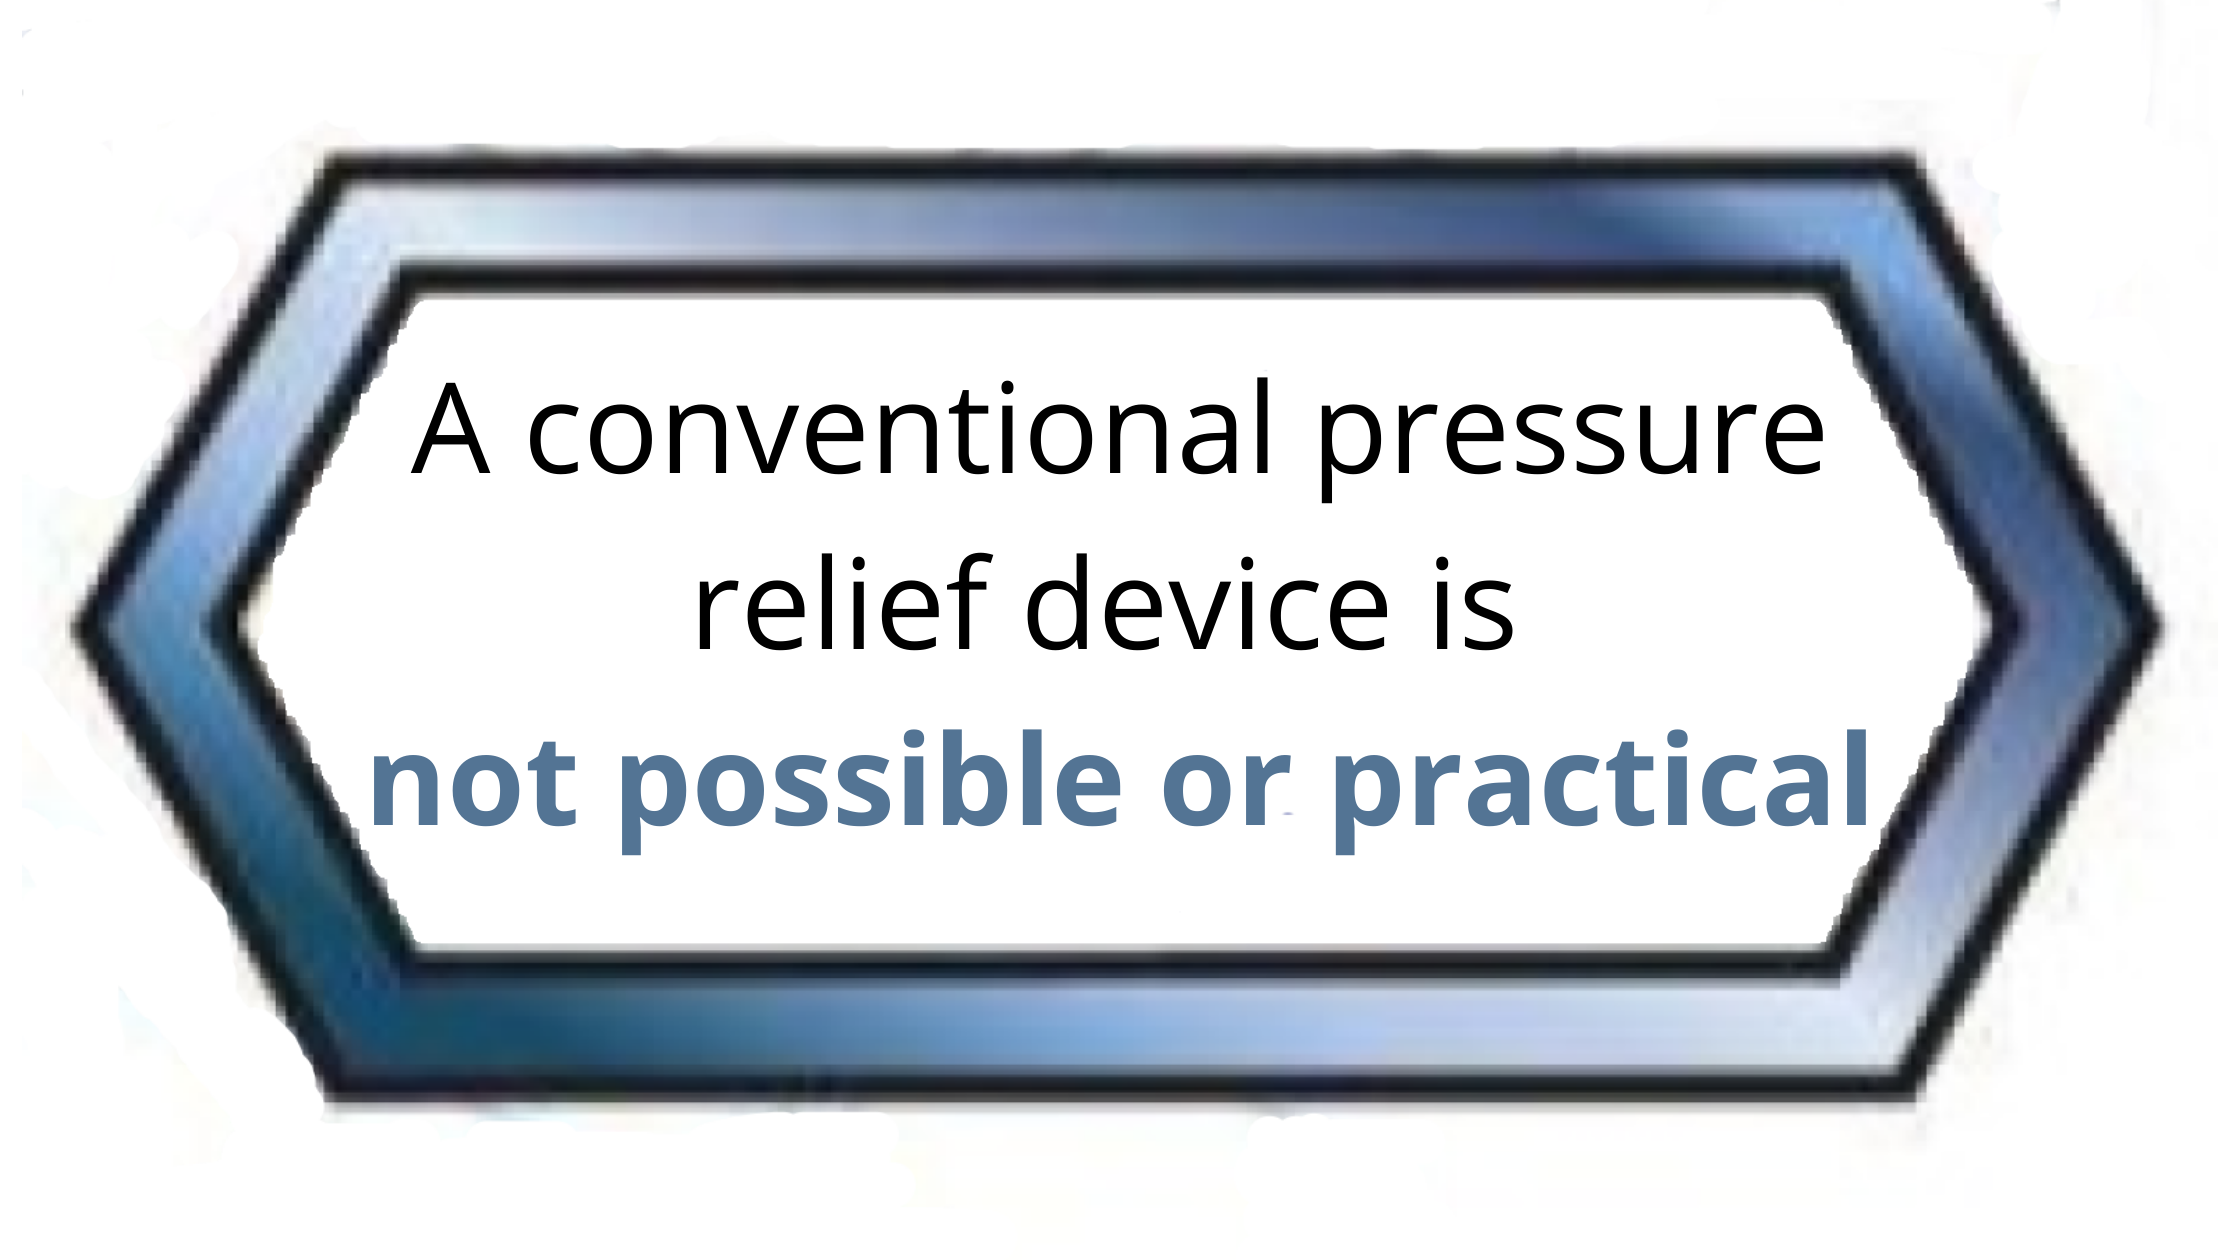 A conventional pressure relief device is “not possible or practical”